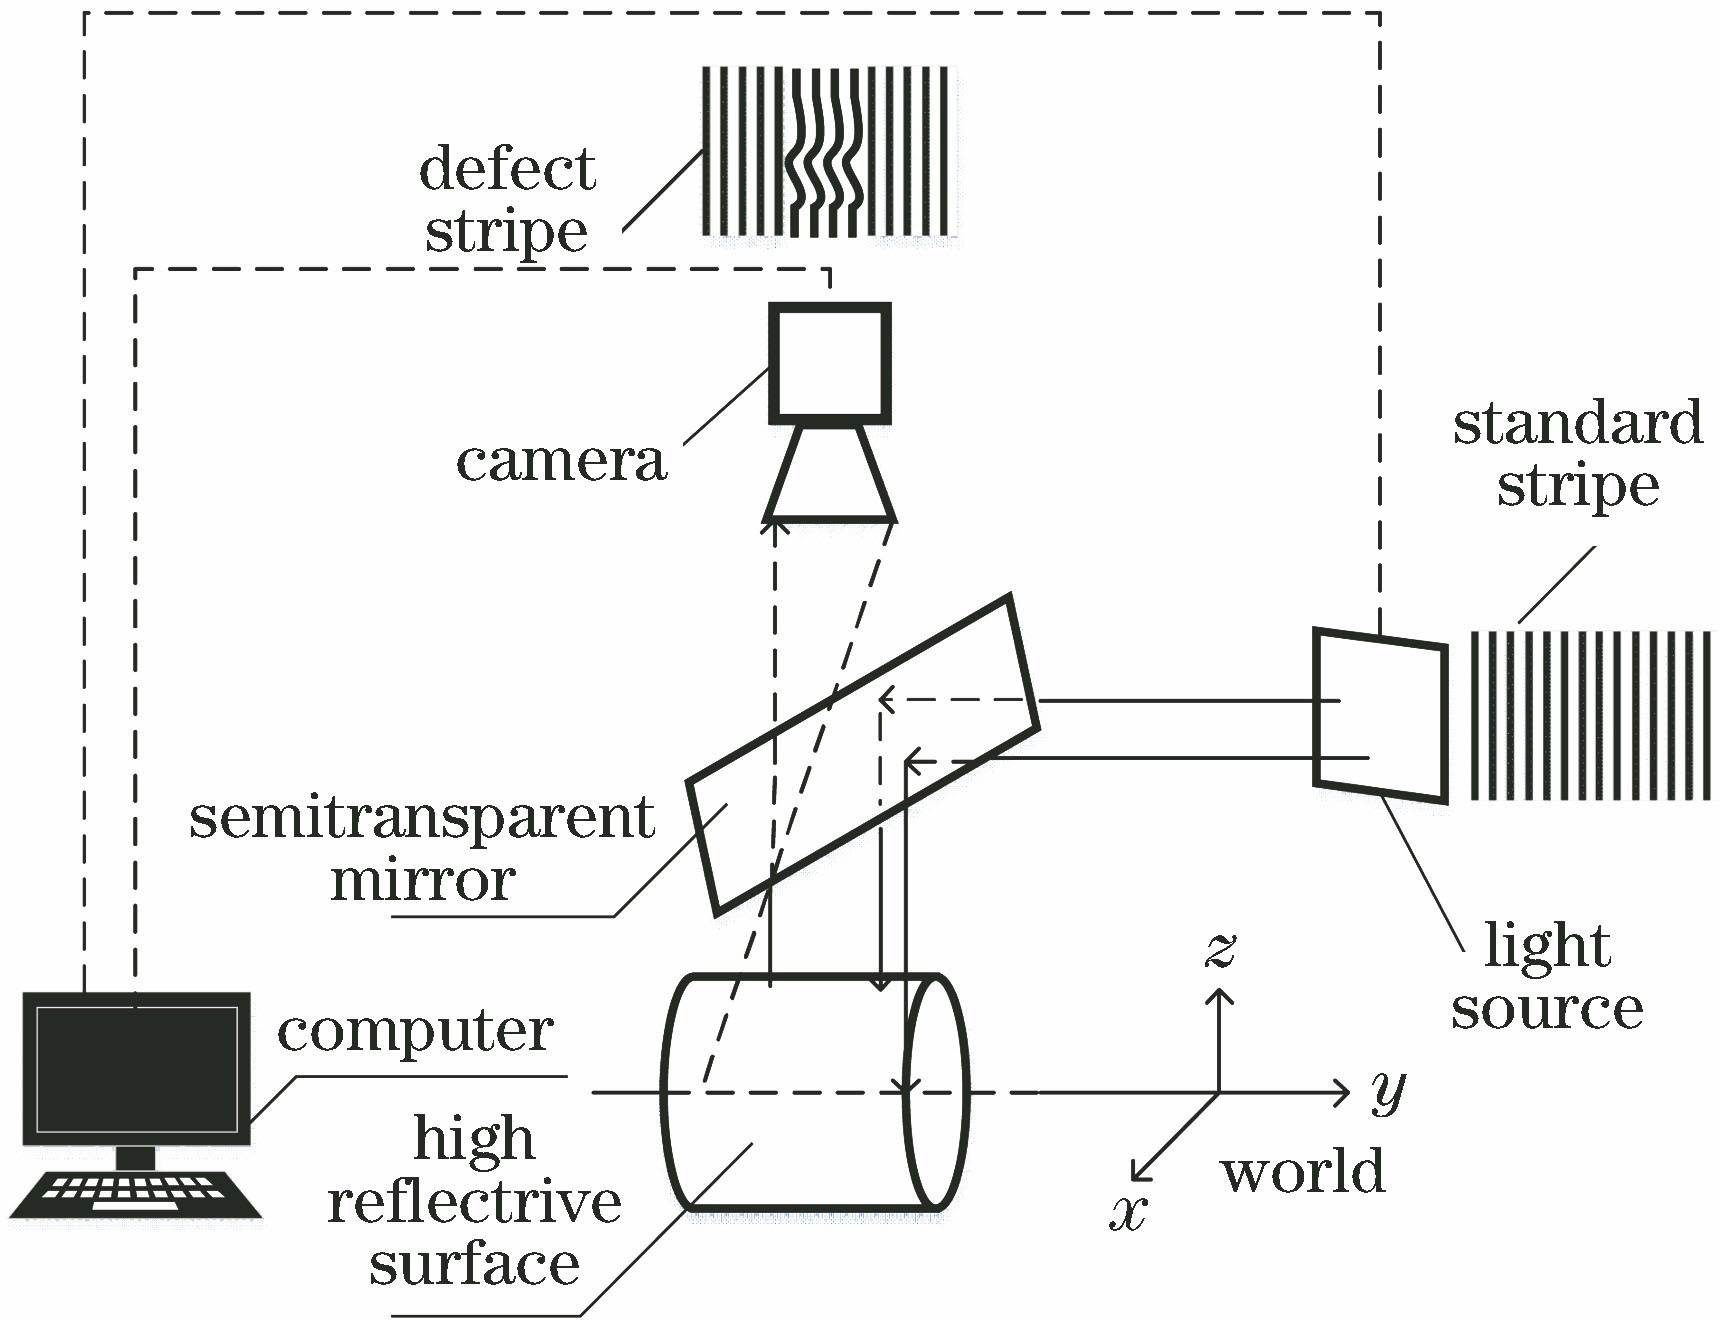 Schematic of defect detection device